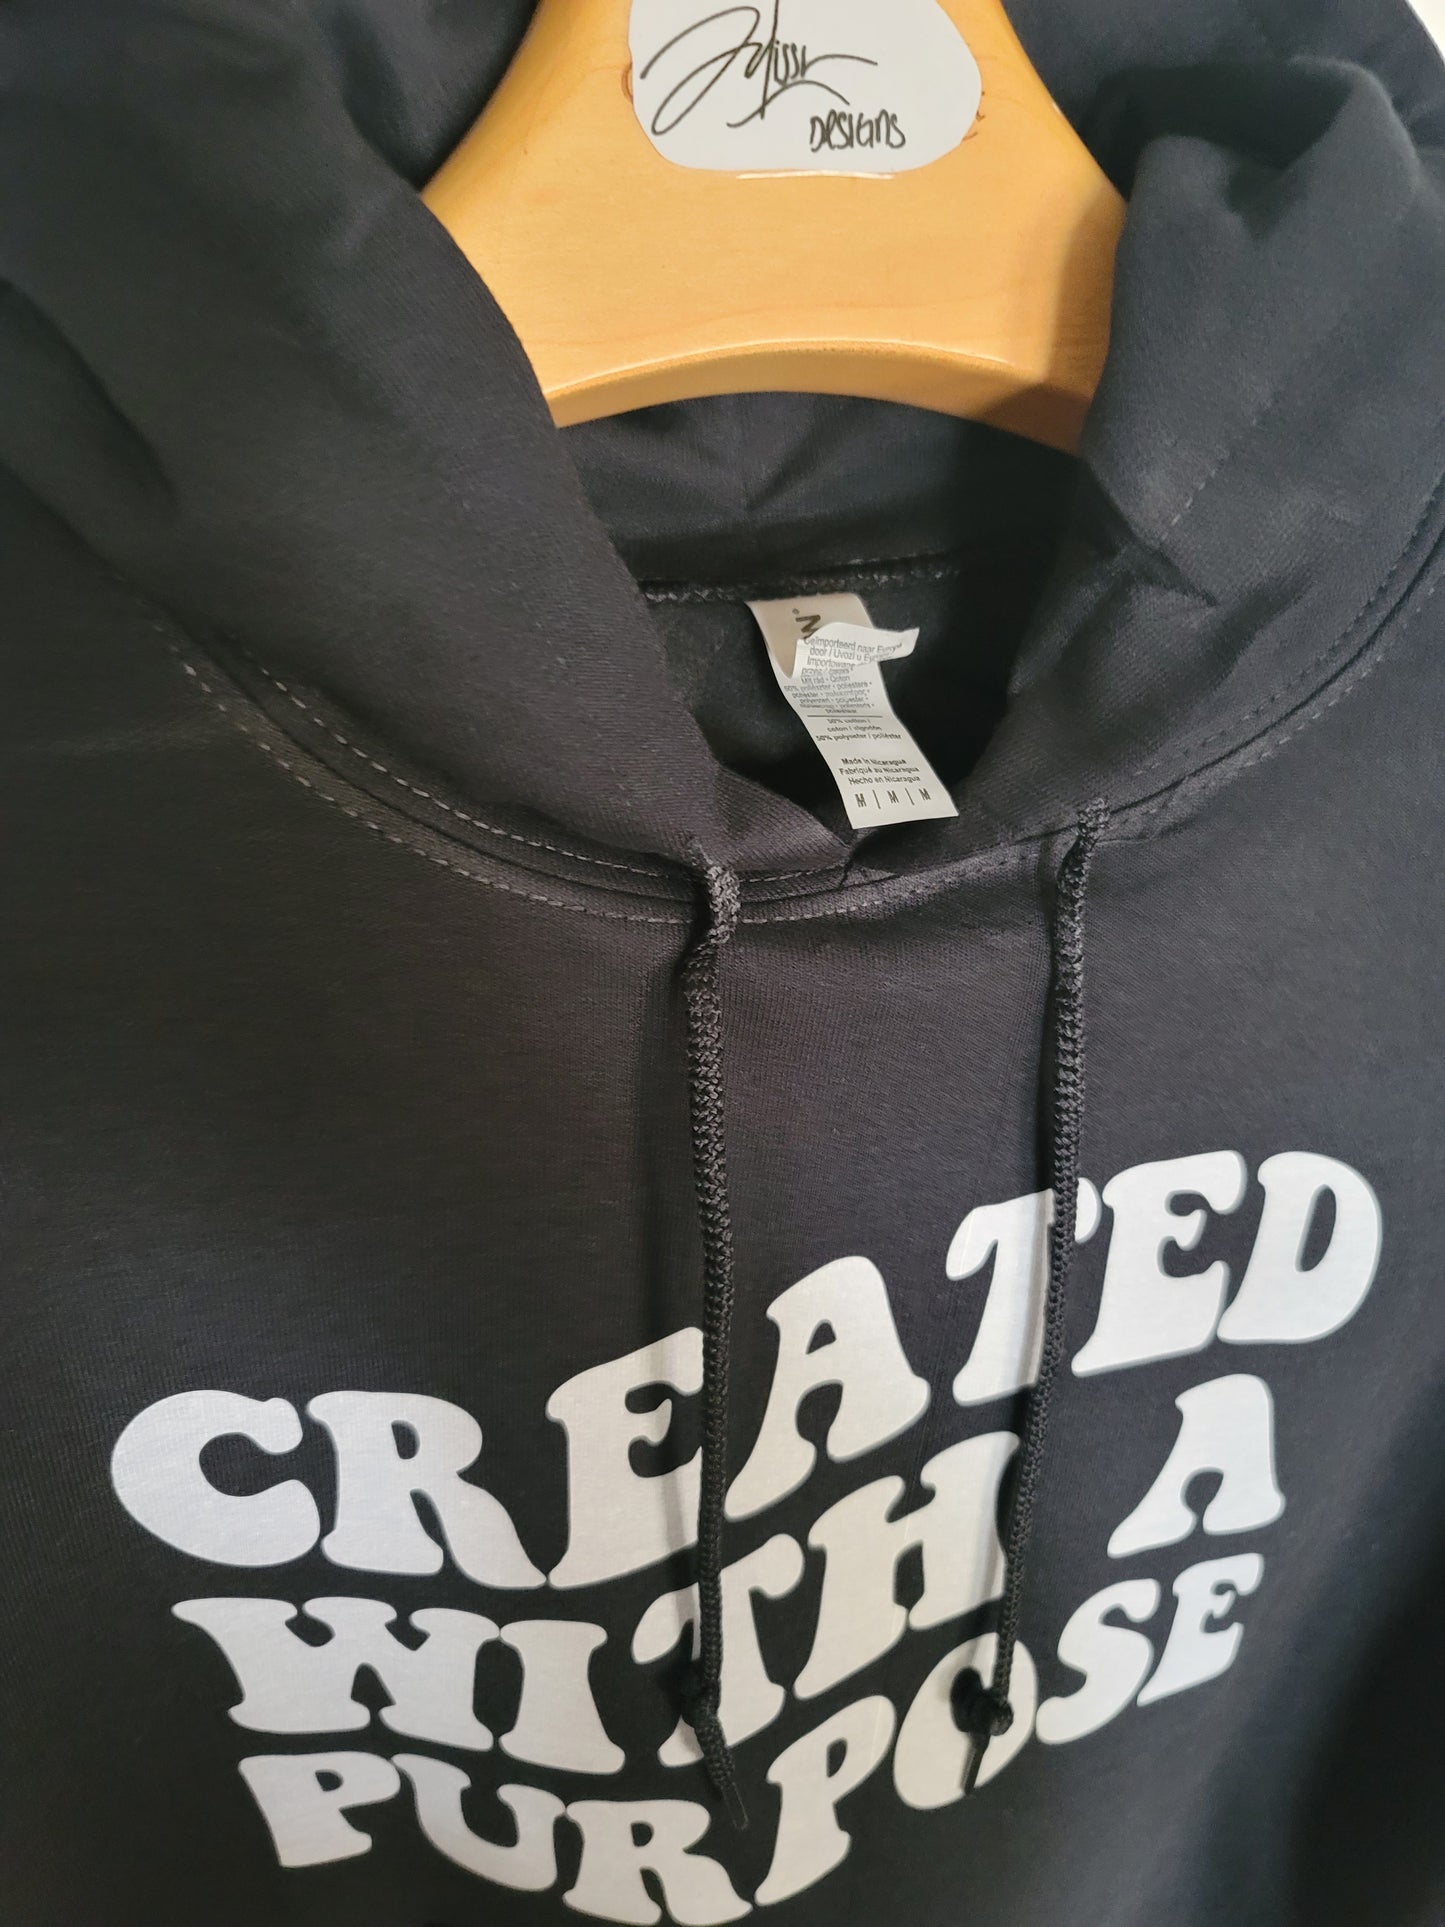 Created with a purpose Black hooded sweartshirt